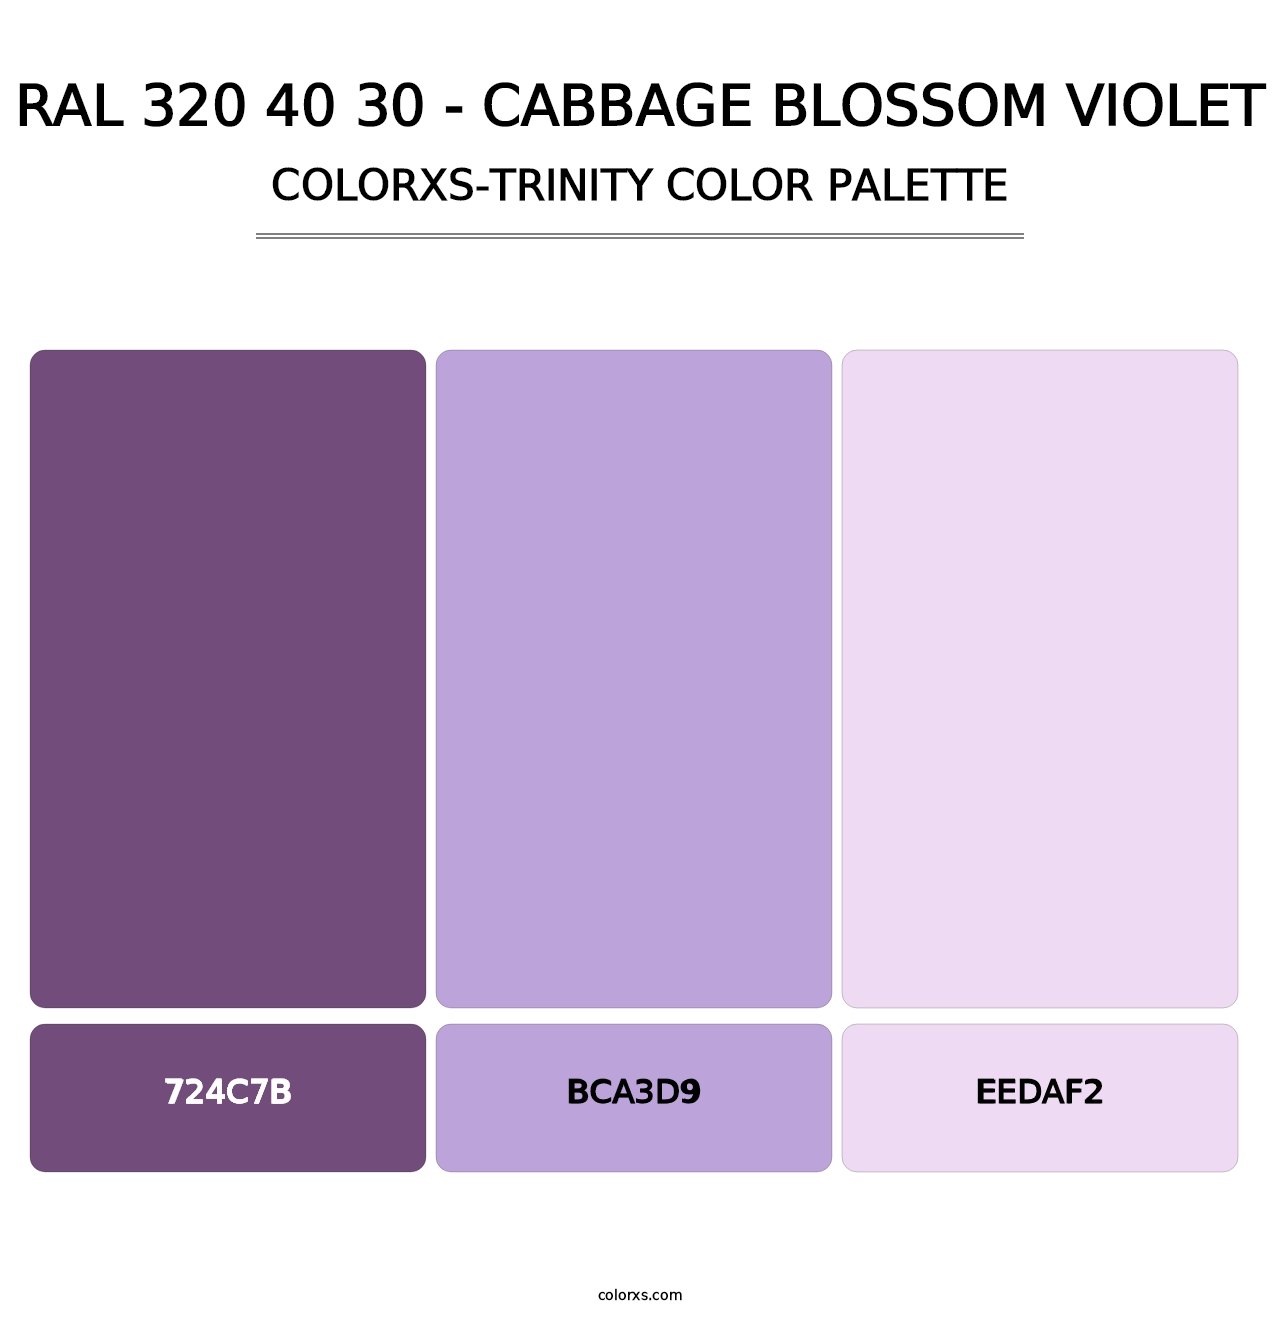 RAL 320 40 30 - Cabbage Blossom Violet - Colorxs Trinity Palette